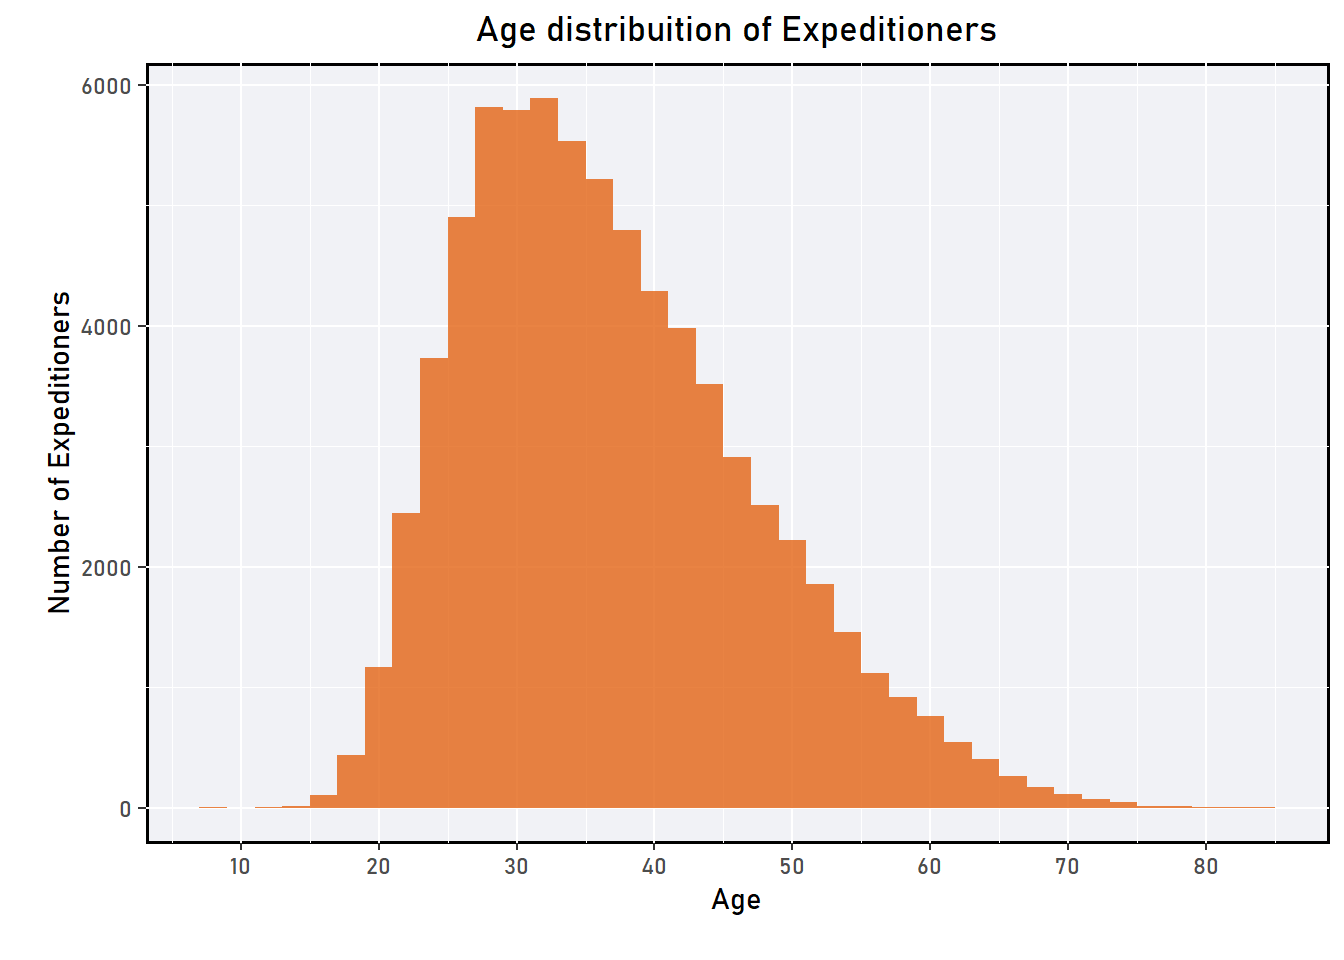 The figure shows the age distribution of the expeditioners and it can be observed that majority of them are around 30 or above 30 years old.